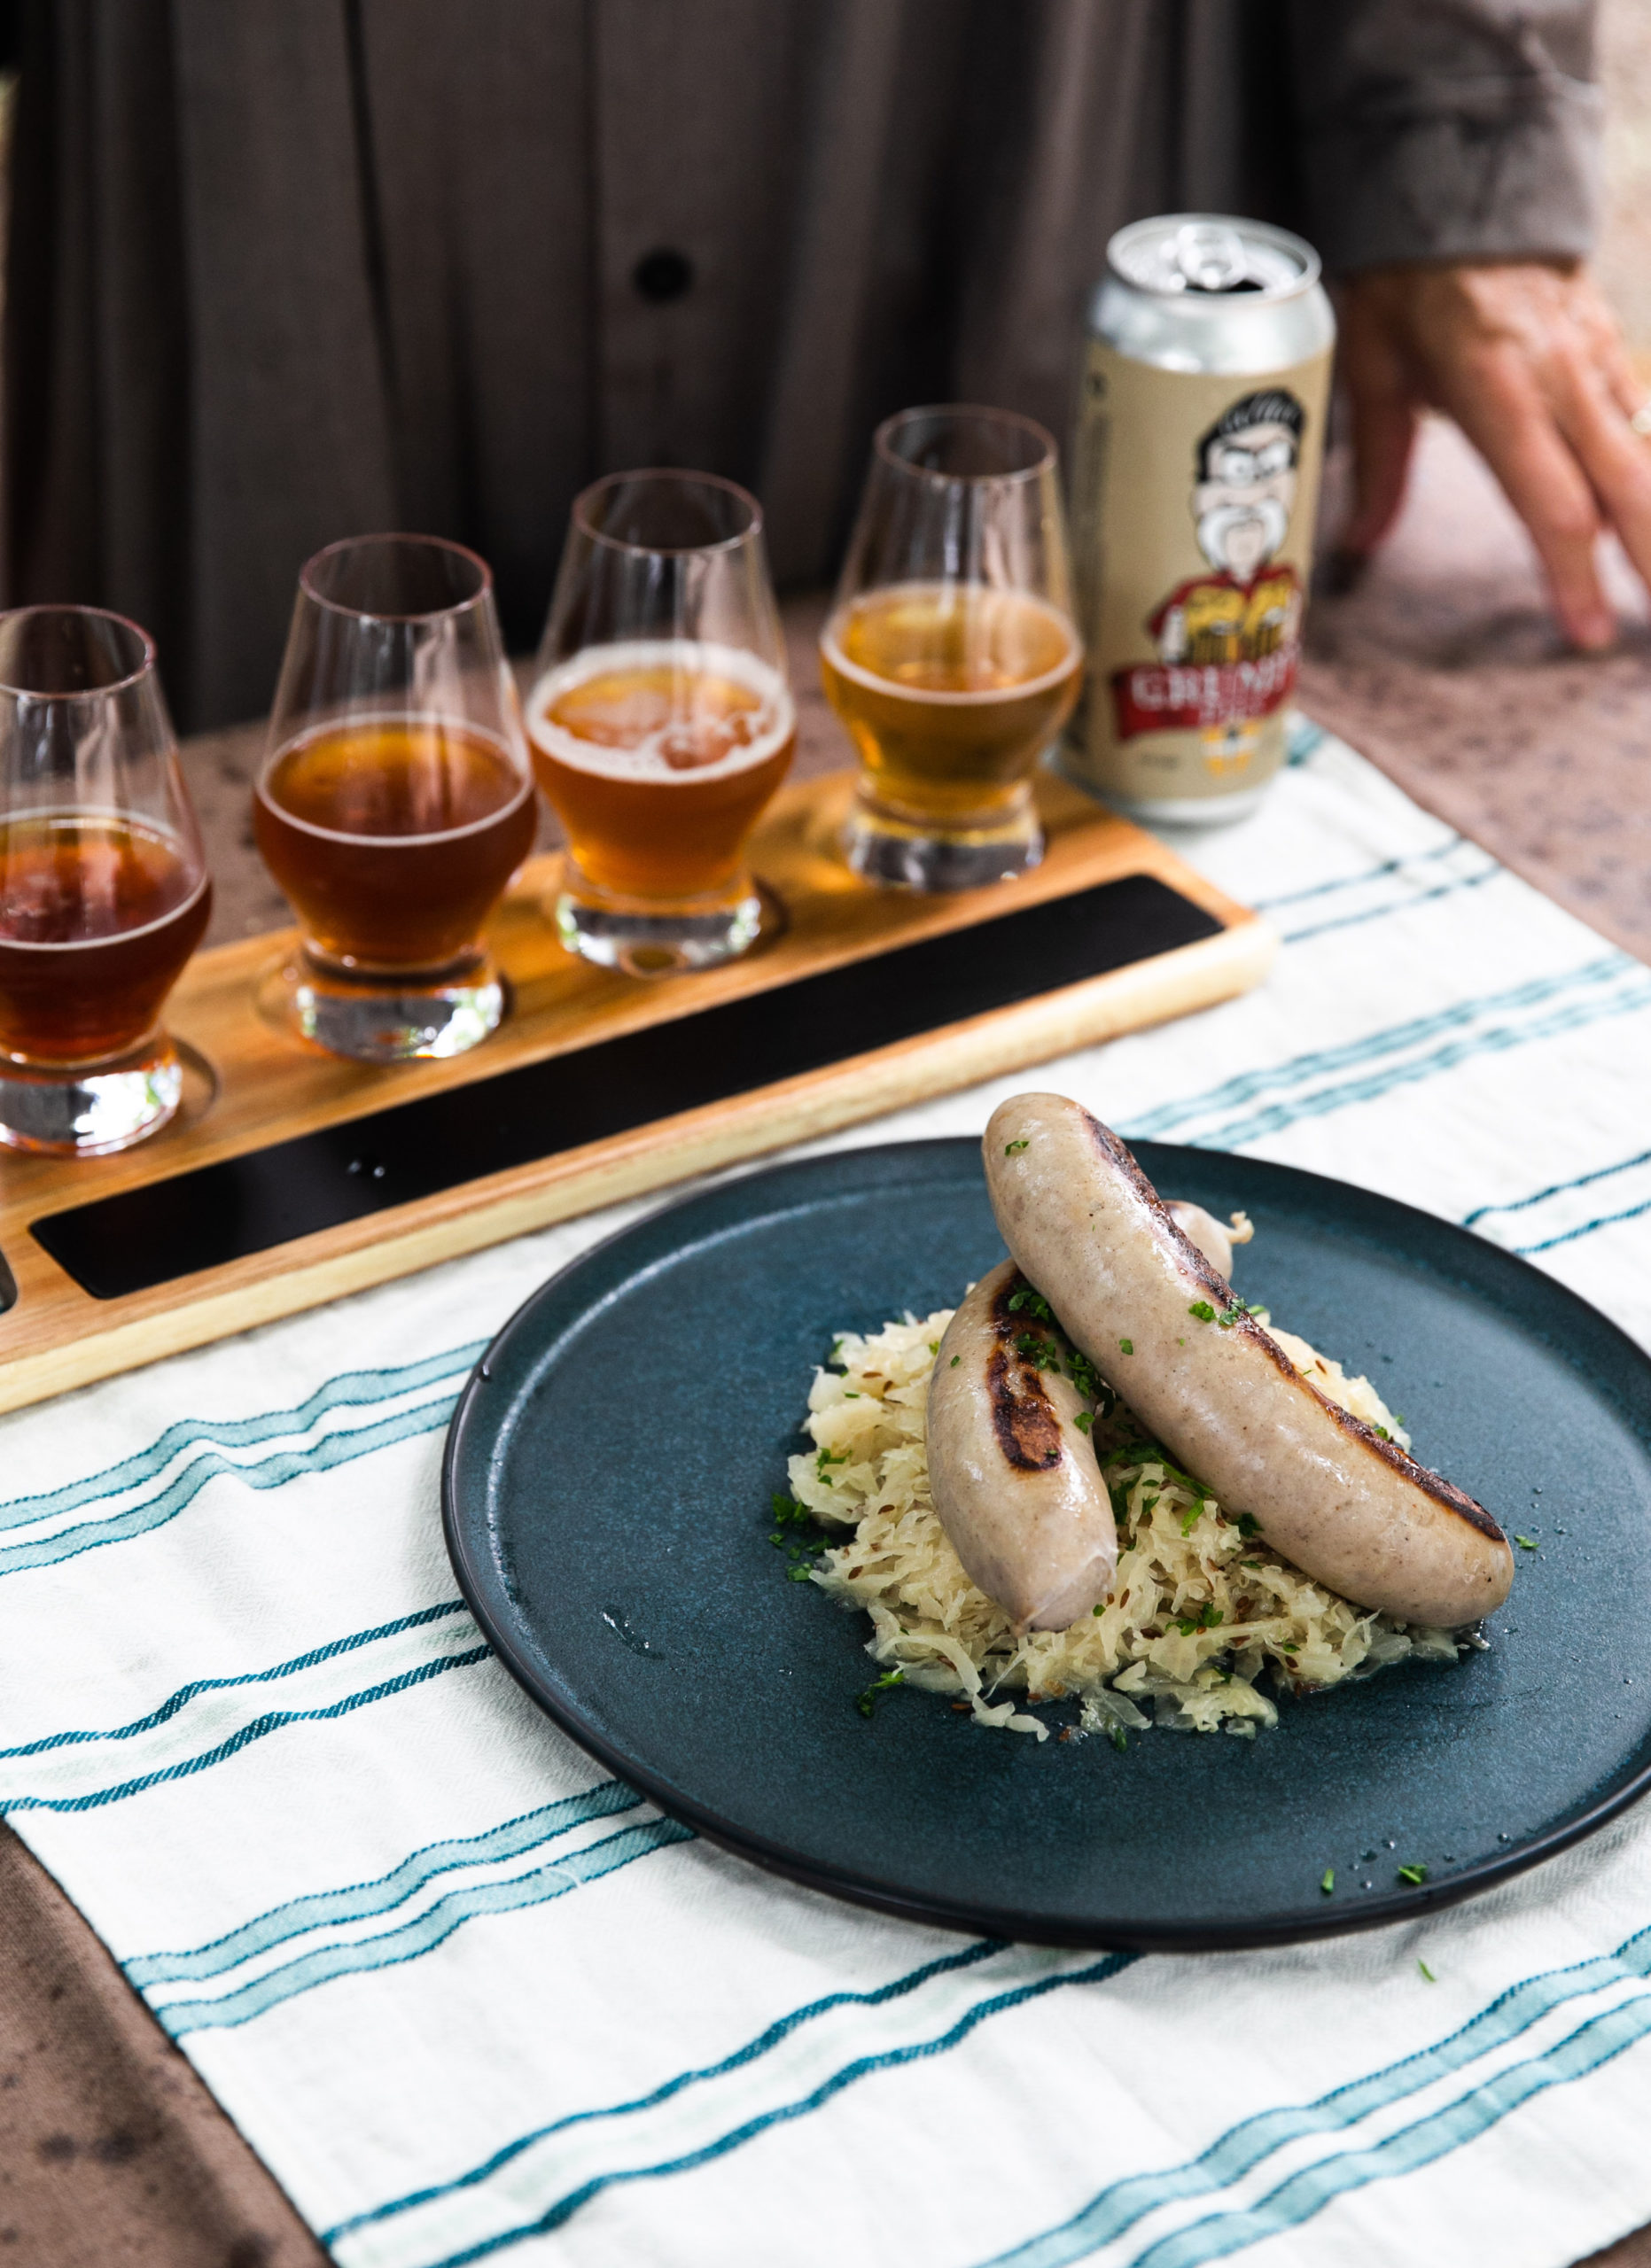 Bangers with beer braised sauerkraut is one of the recipes in the February book from the Loaves & Fishes Farm Series.